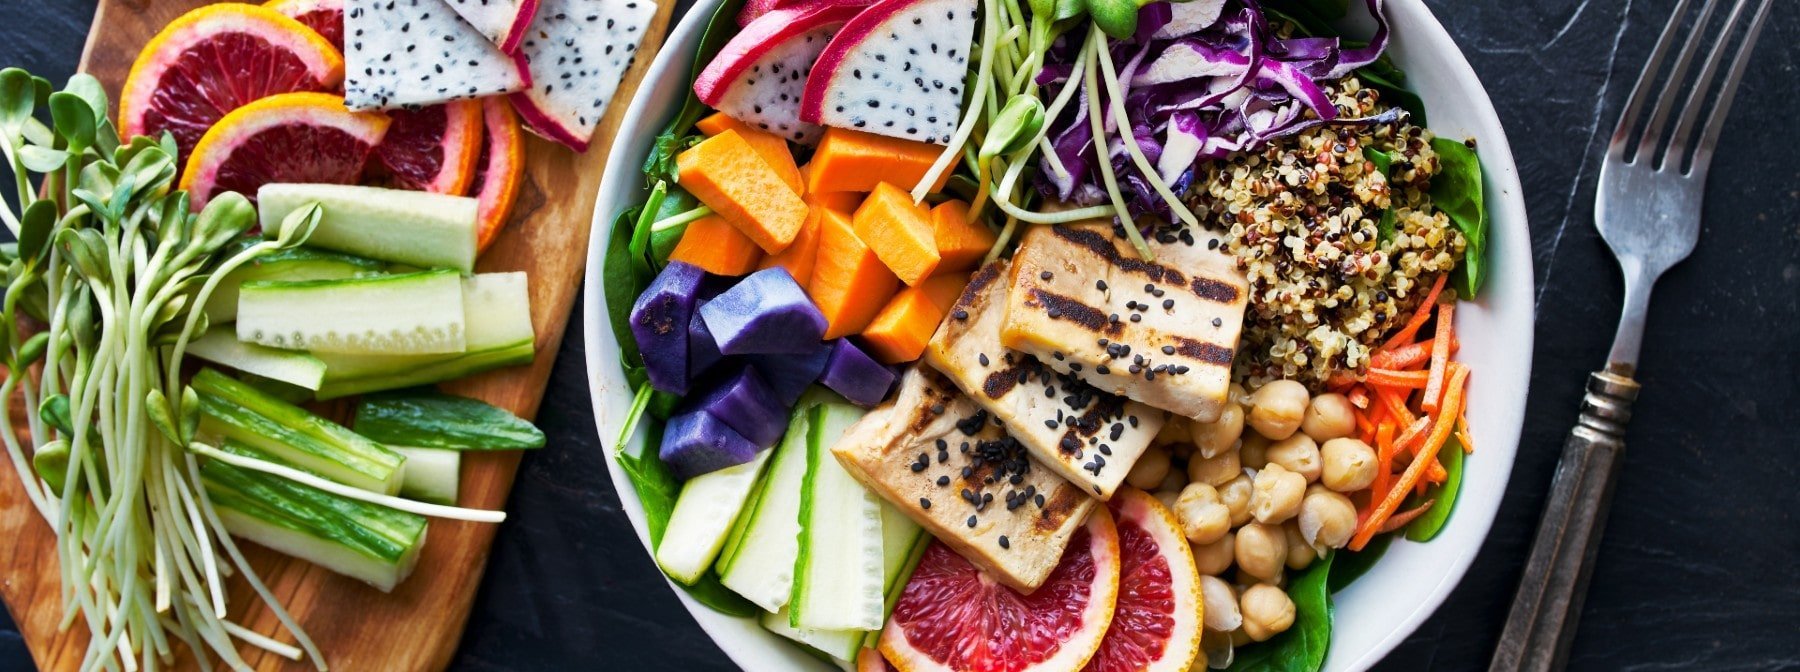 8 Vegan Pre-Workout Foods That Are Scientifically Backed